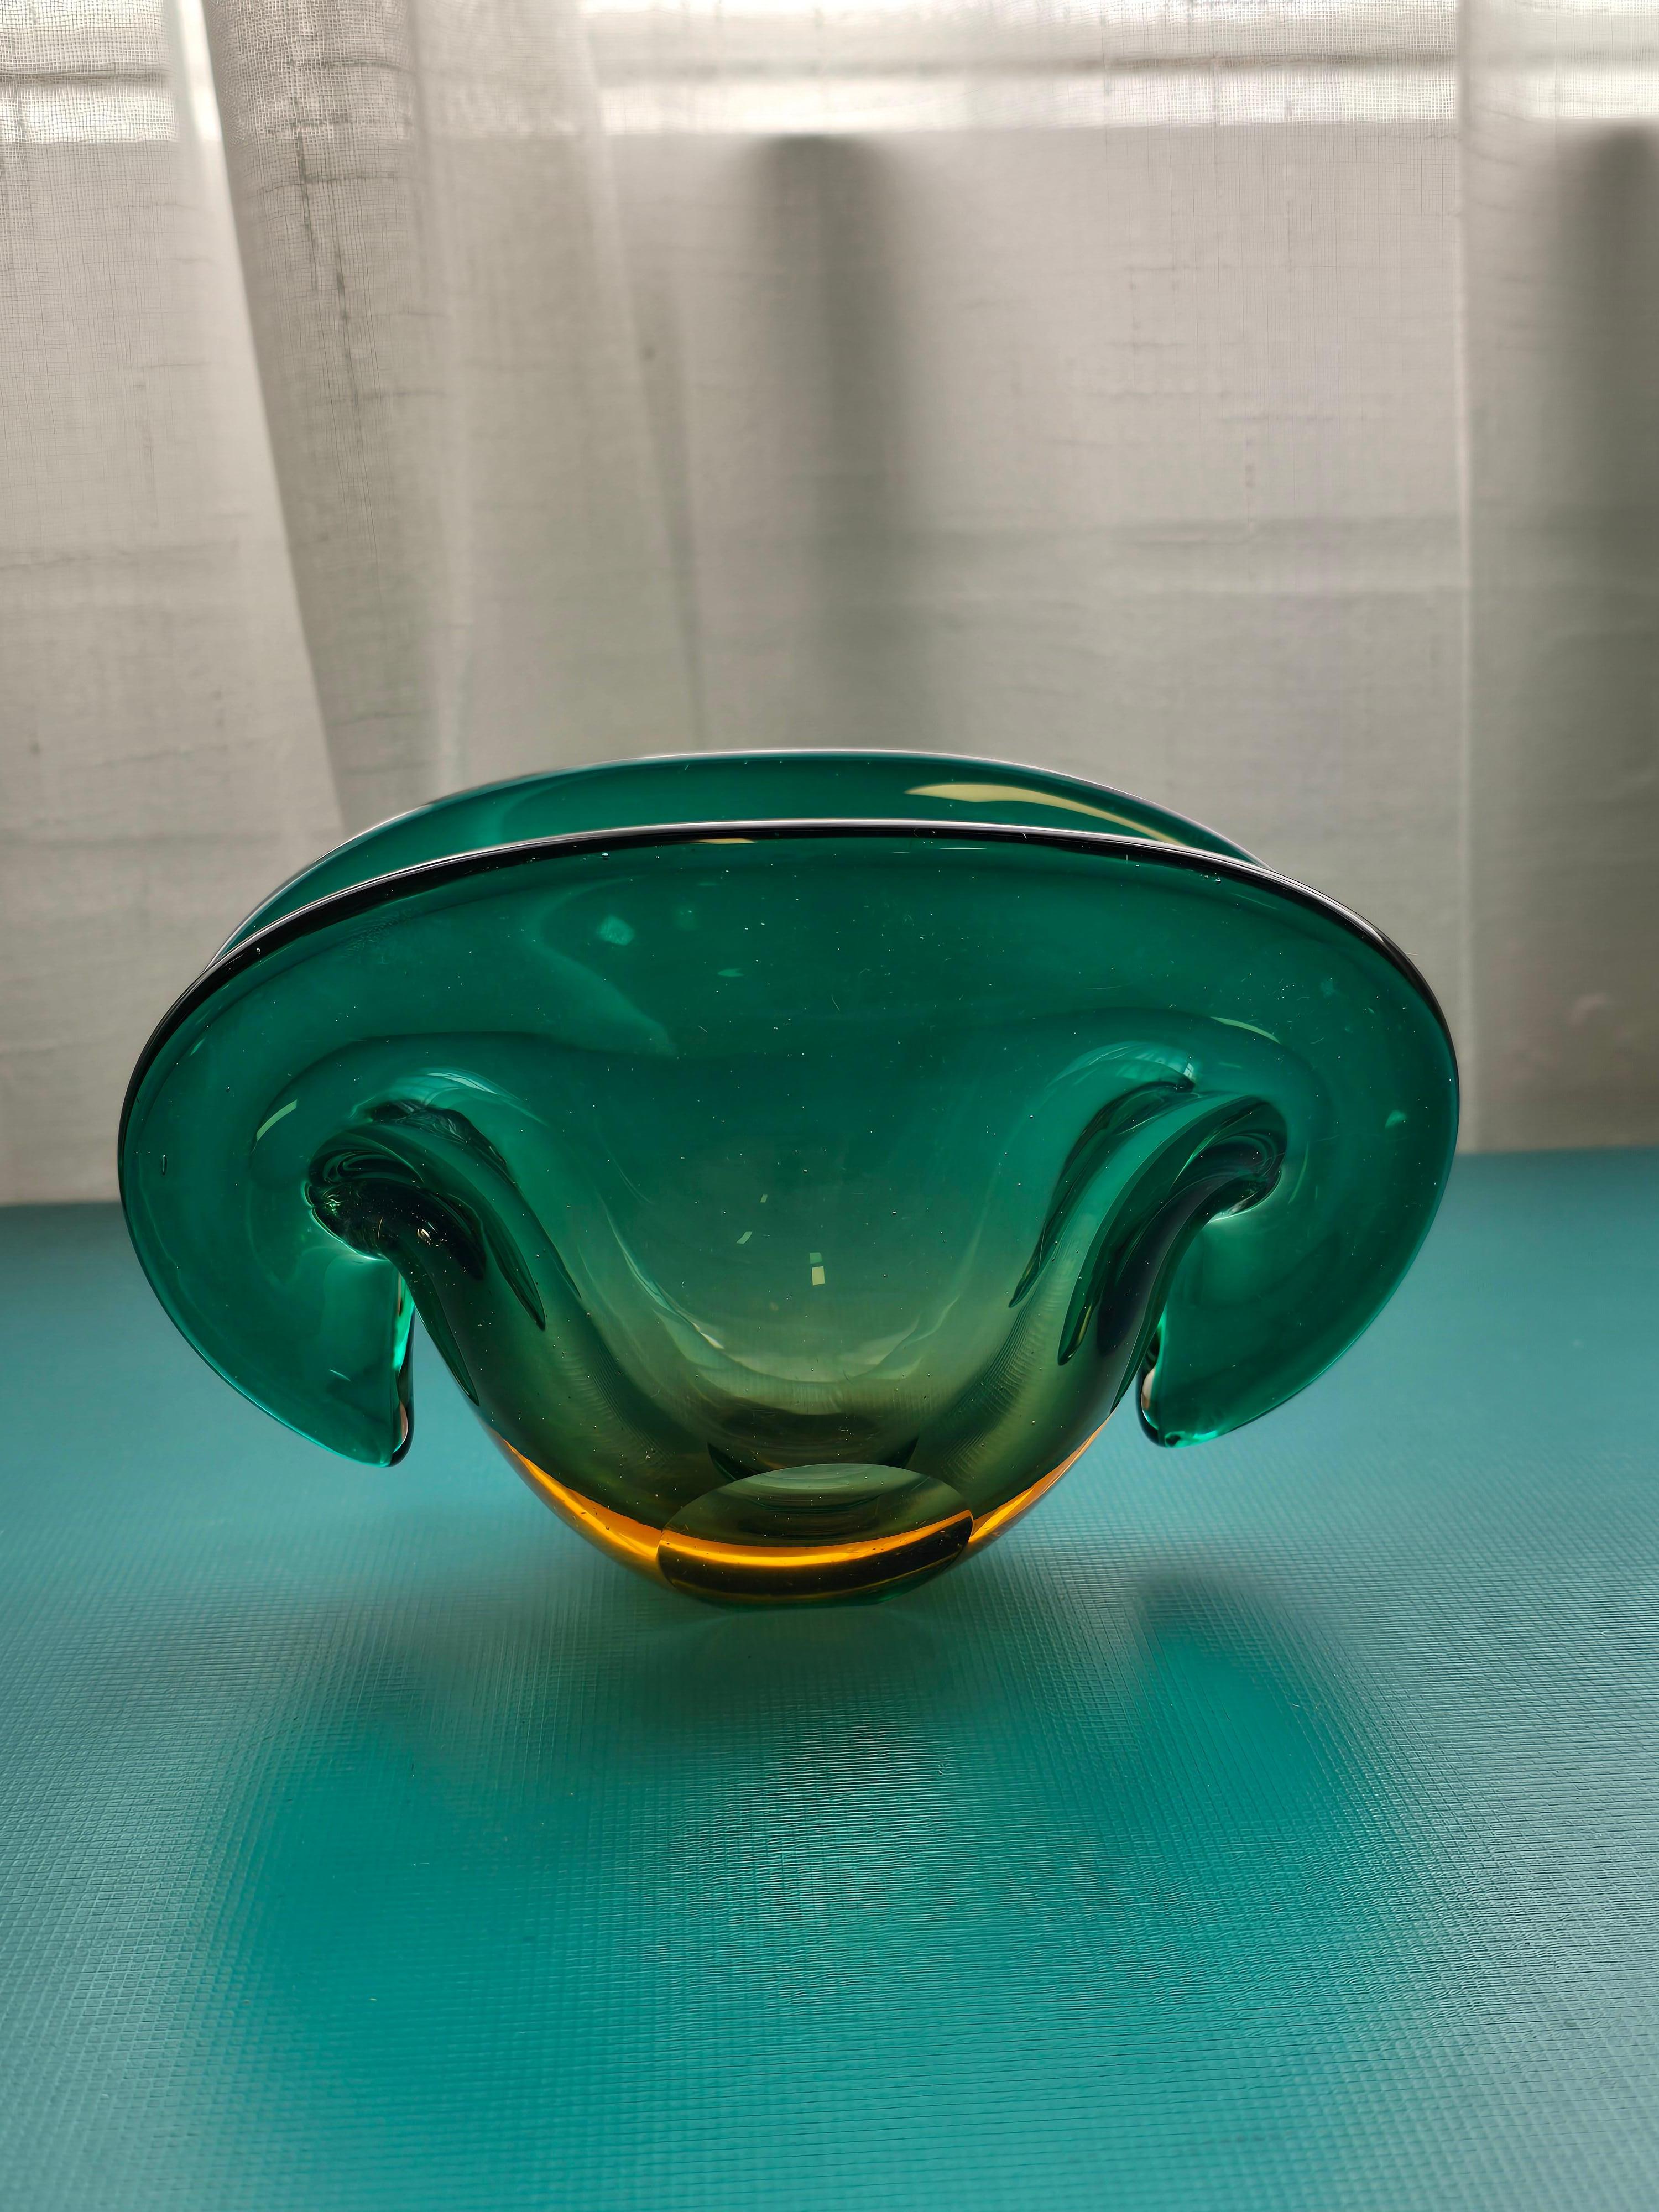 Transparent blue green art glass Archimede Seguso decorative bowl made by Murano. This striking decorative bowl resembles the shape of a clam. It was designed by Archimede Seguso and made in the 1960s in Murano, Italy. The transparent art glass